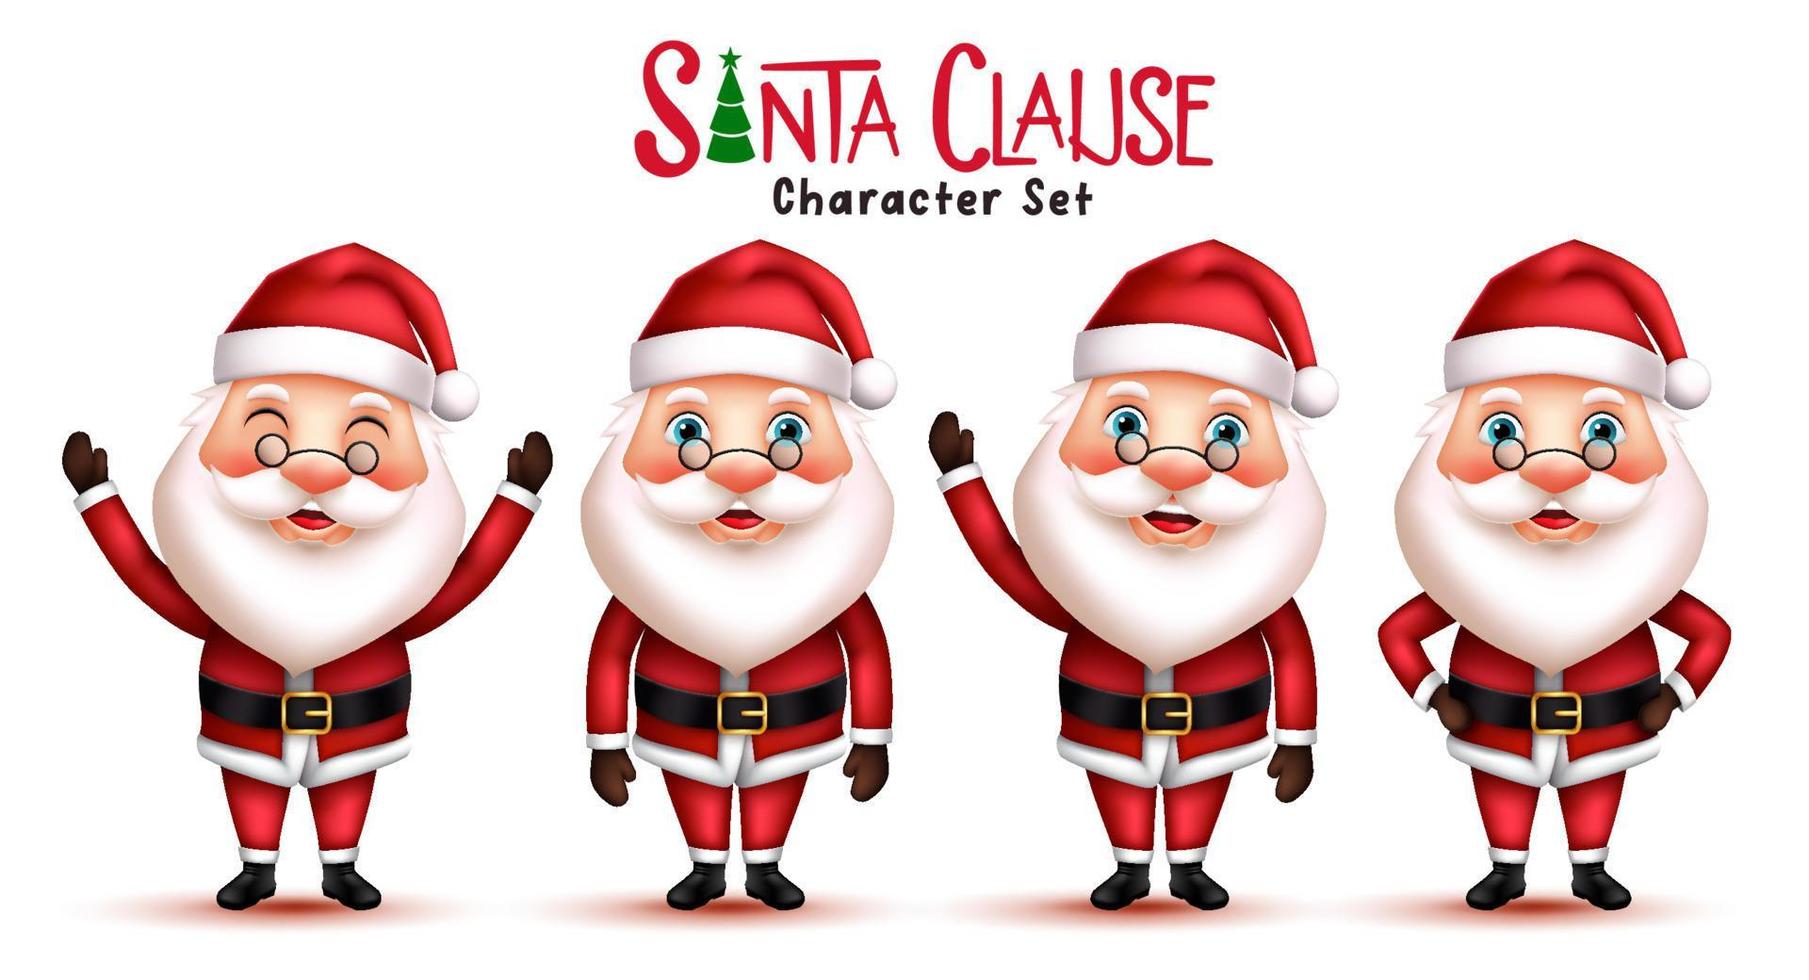 Santa claus christmas character vector set. Santa claus 3d characters in standing and waving pose and gestures with smiling facial expression for xmas season collection. Vector illustration